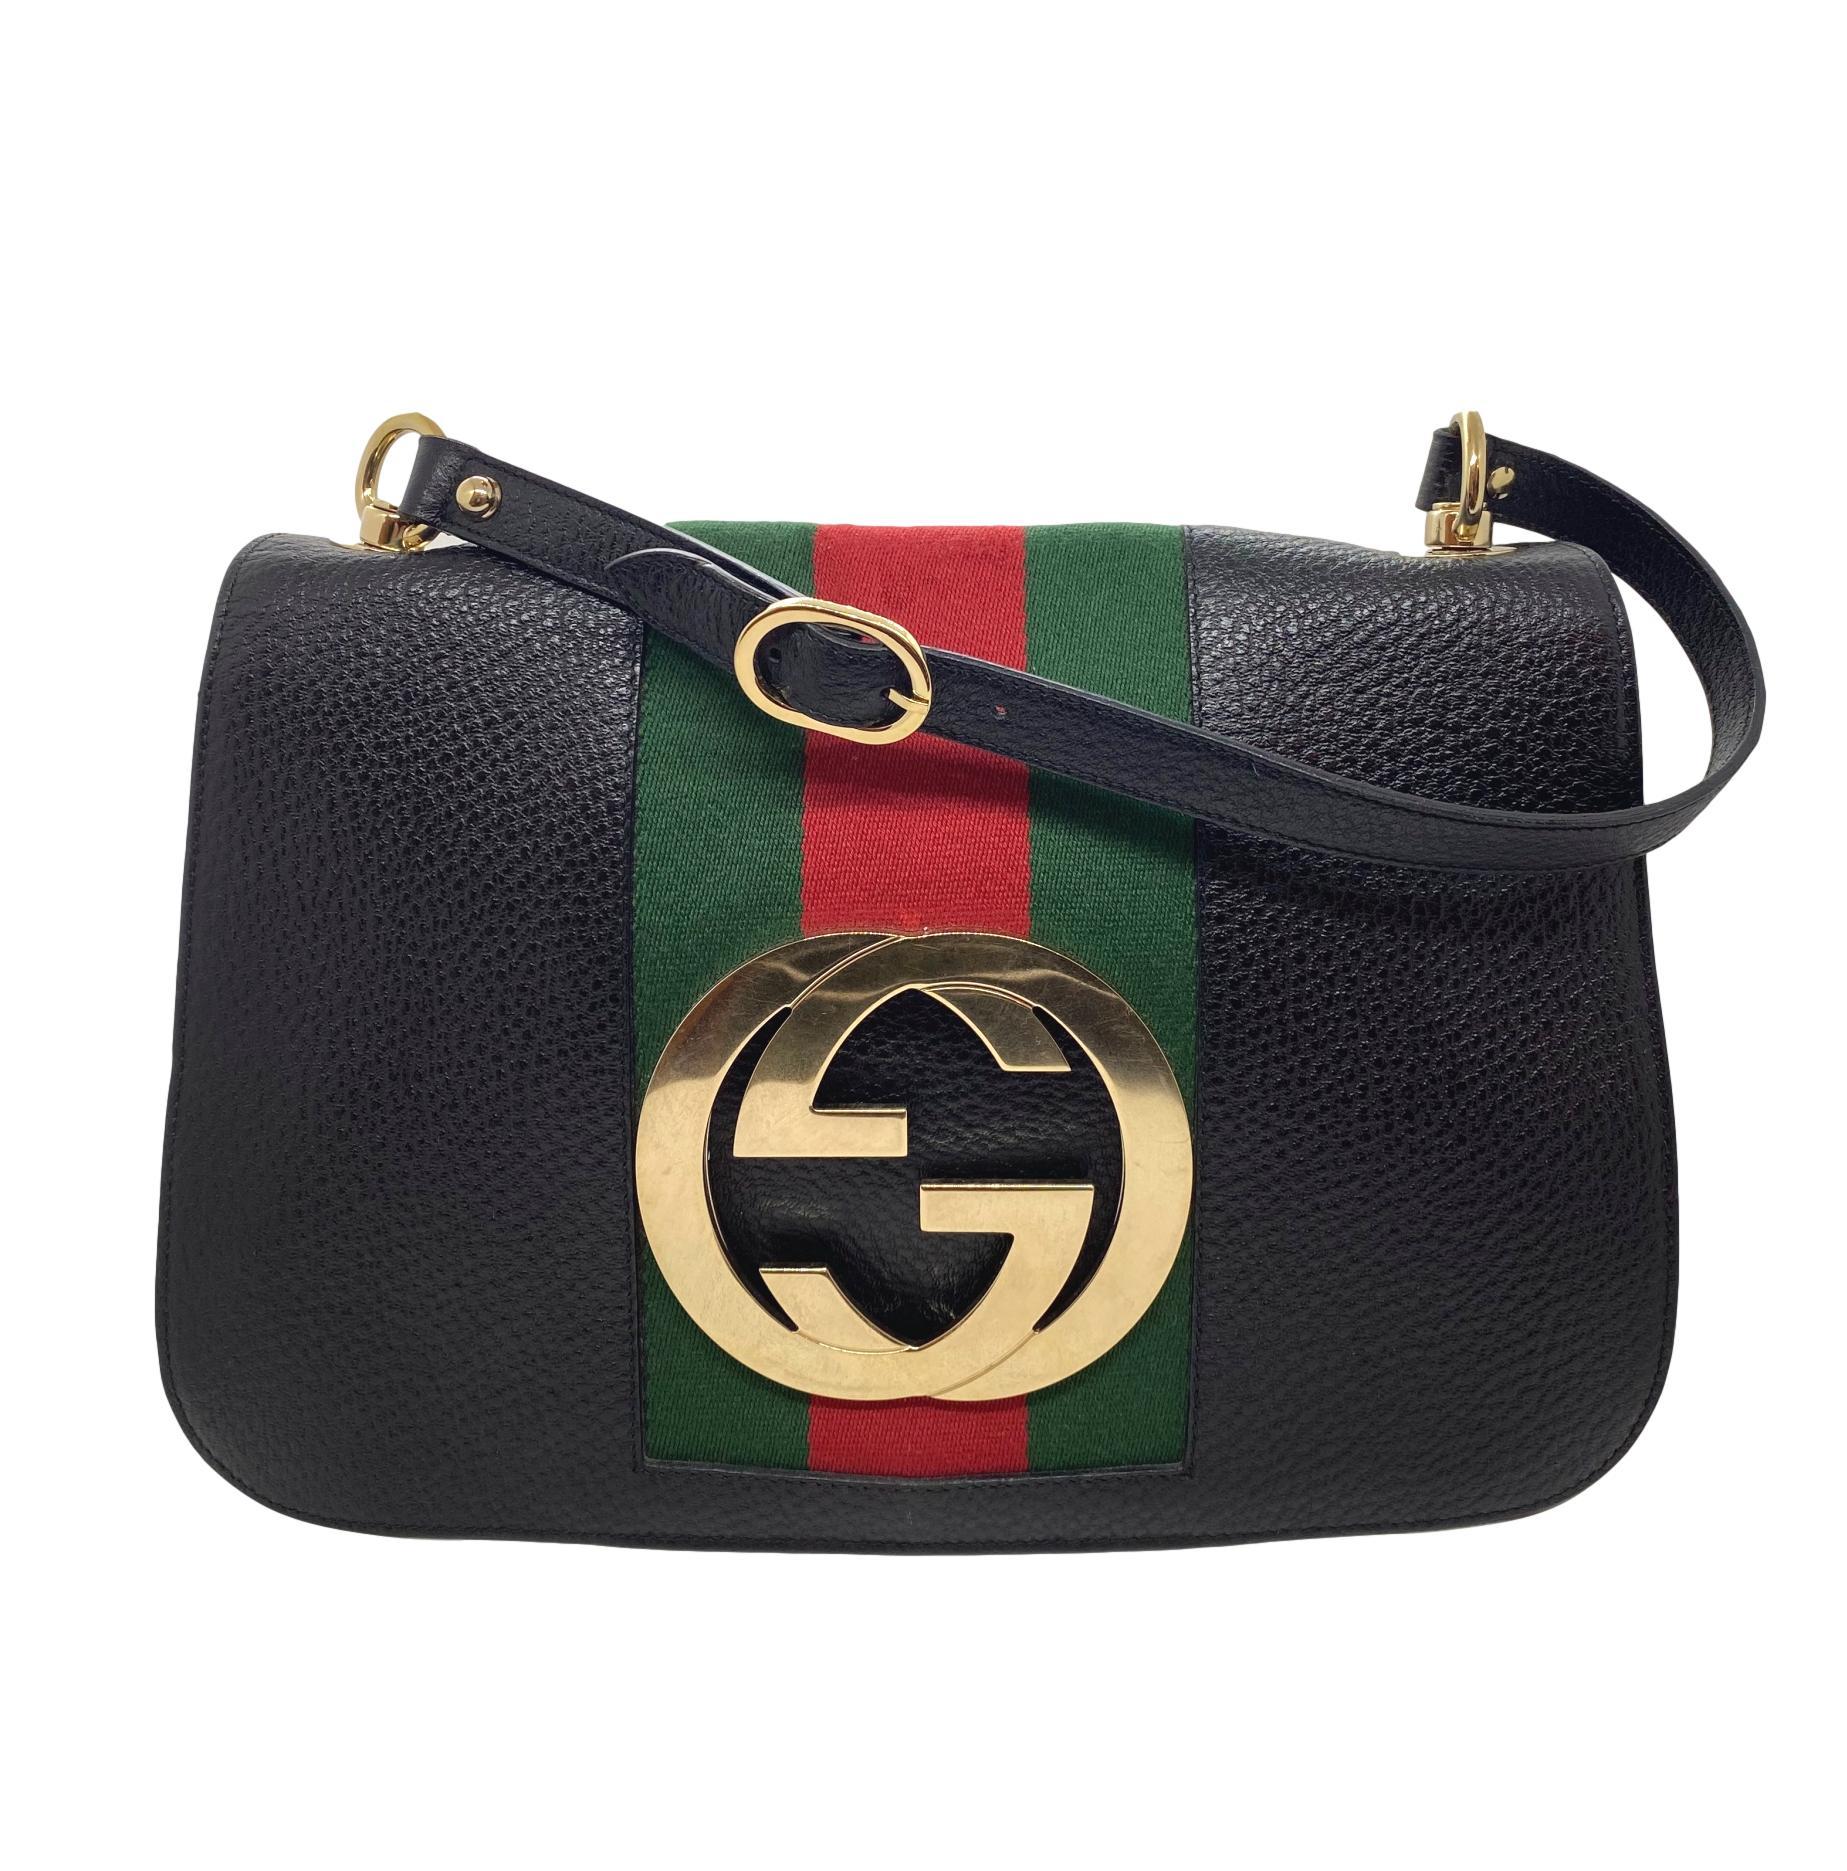 Gucci Web Pebbled Calfskin Blondie Shoulder Flap Bag by Tom Ford. This classic Gucci 